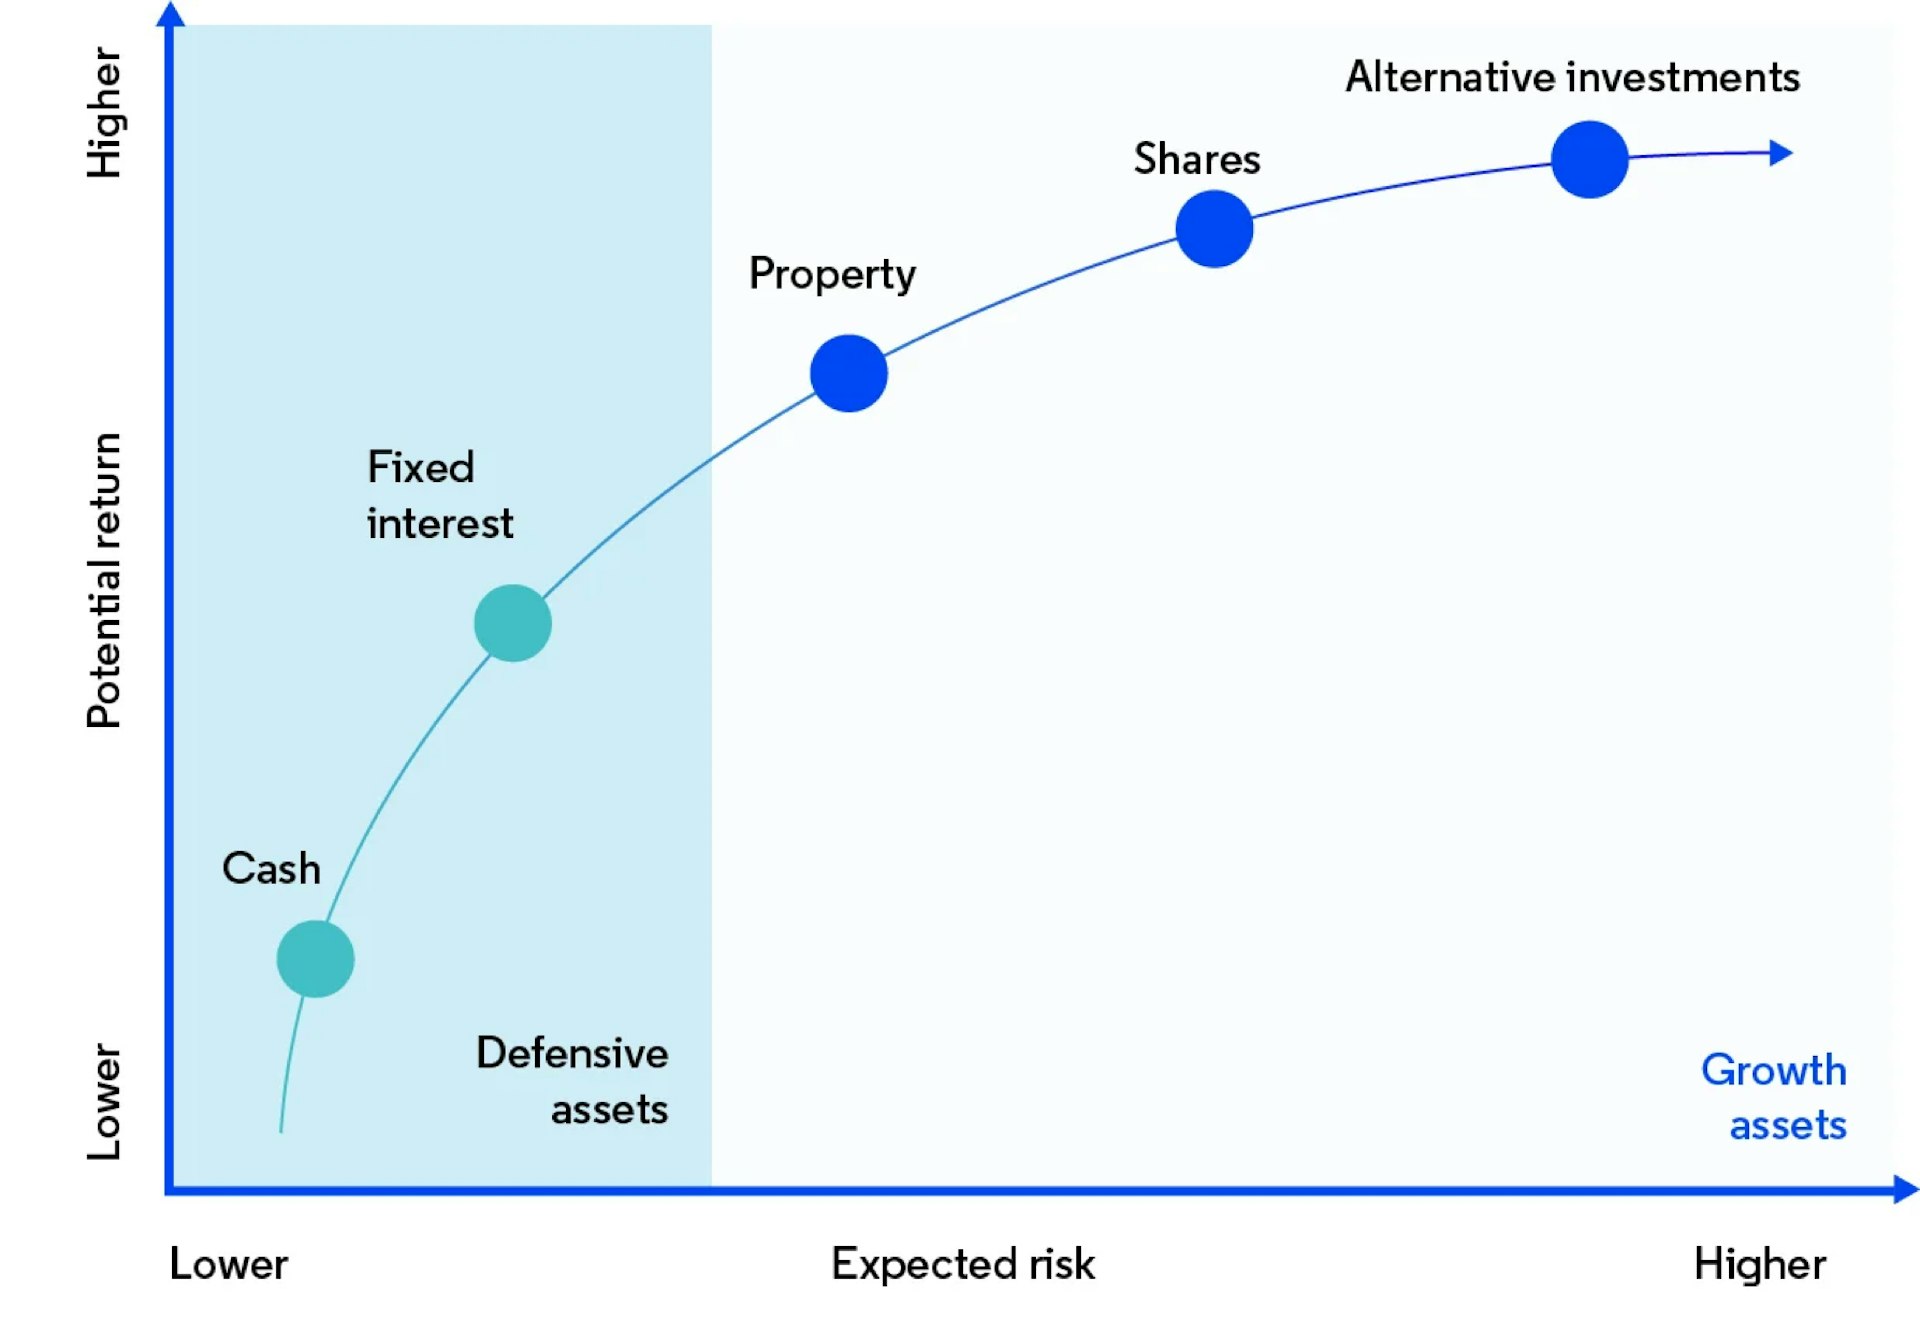 Graph showing potential return and expected risk for different investments